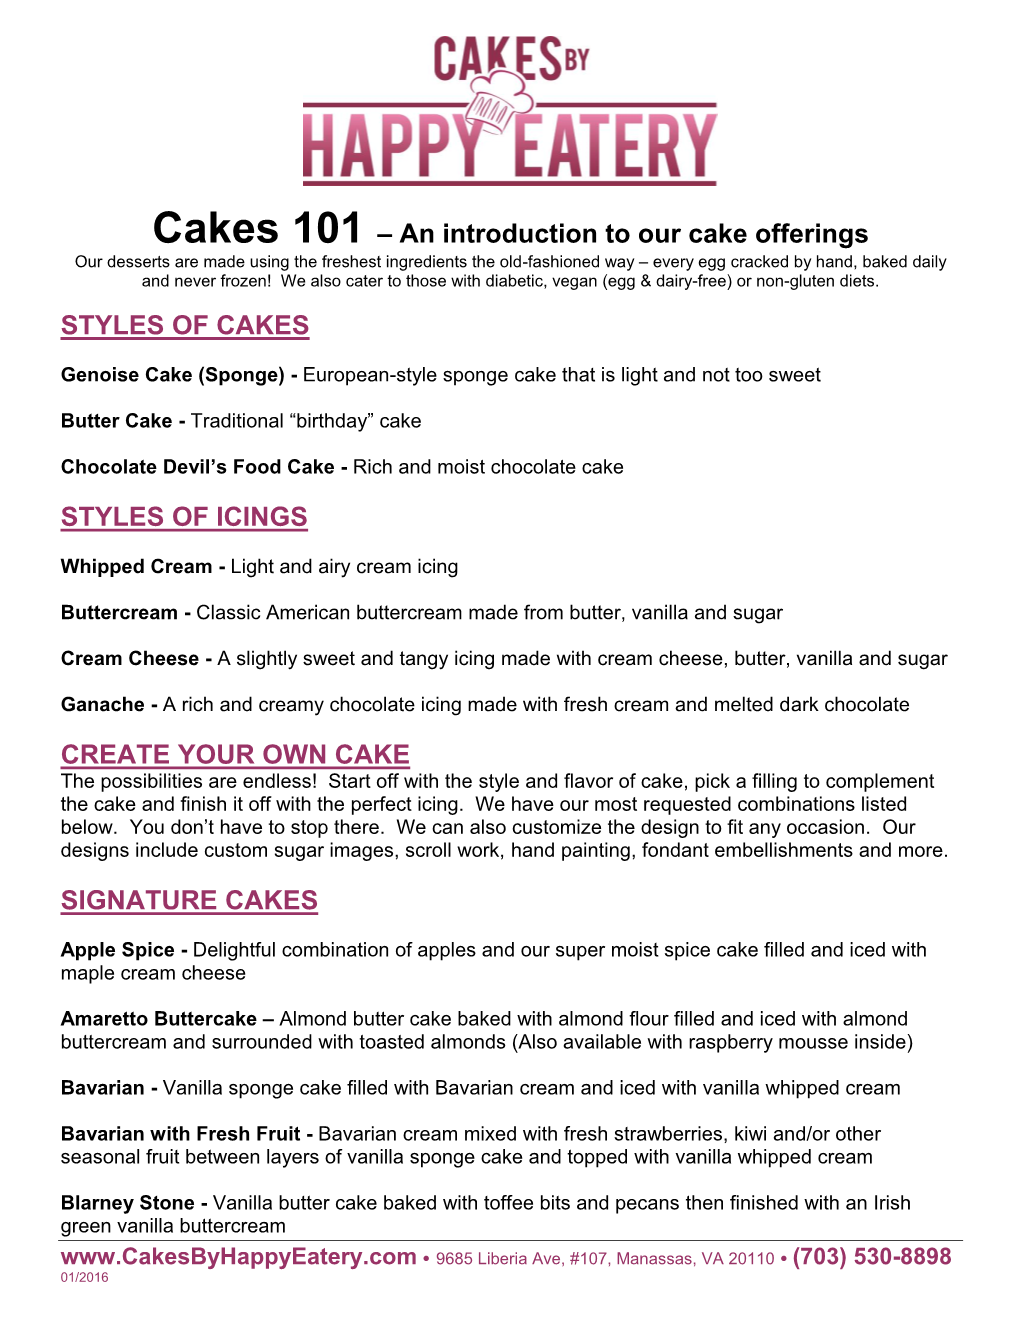 Cakes 101 – an Introduction to Our Cake Offerings STYLES of CAKES STYLES of ICINGS CREATE YOUR OWN CAKE SIGNATURE CAKES